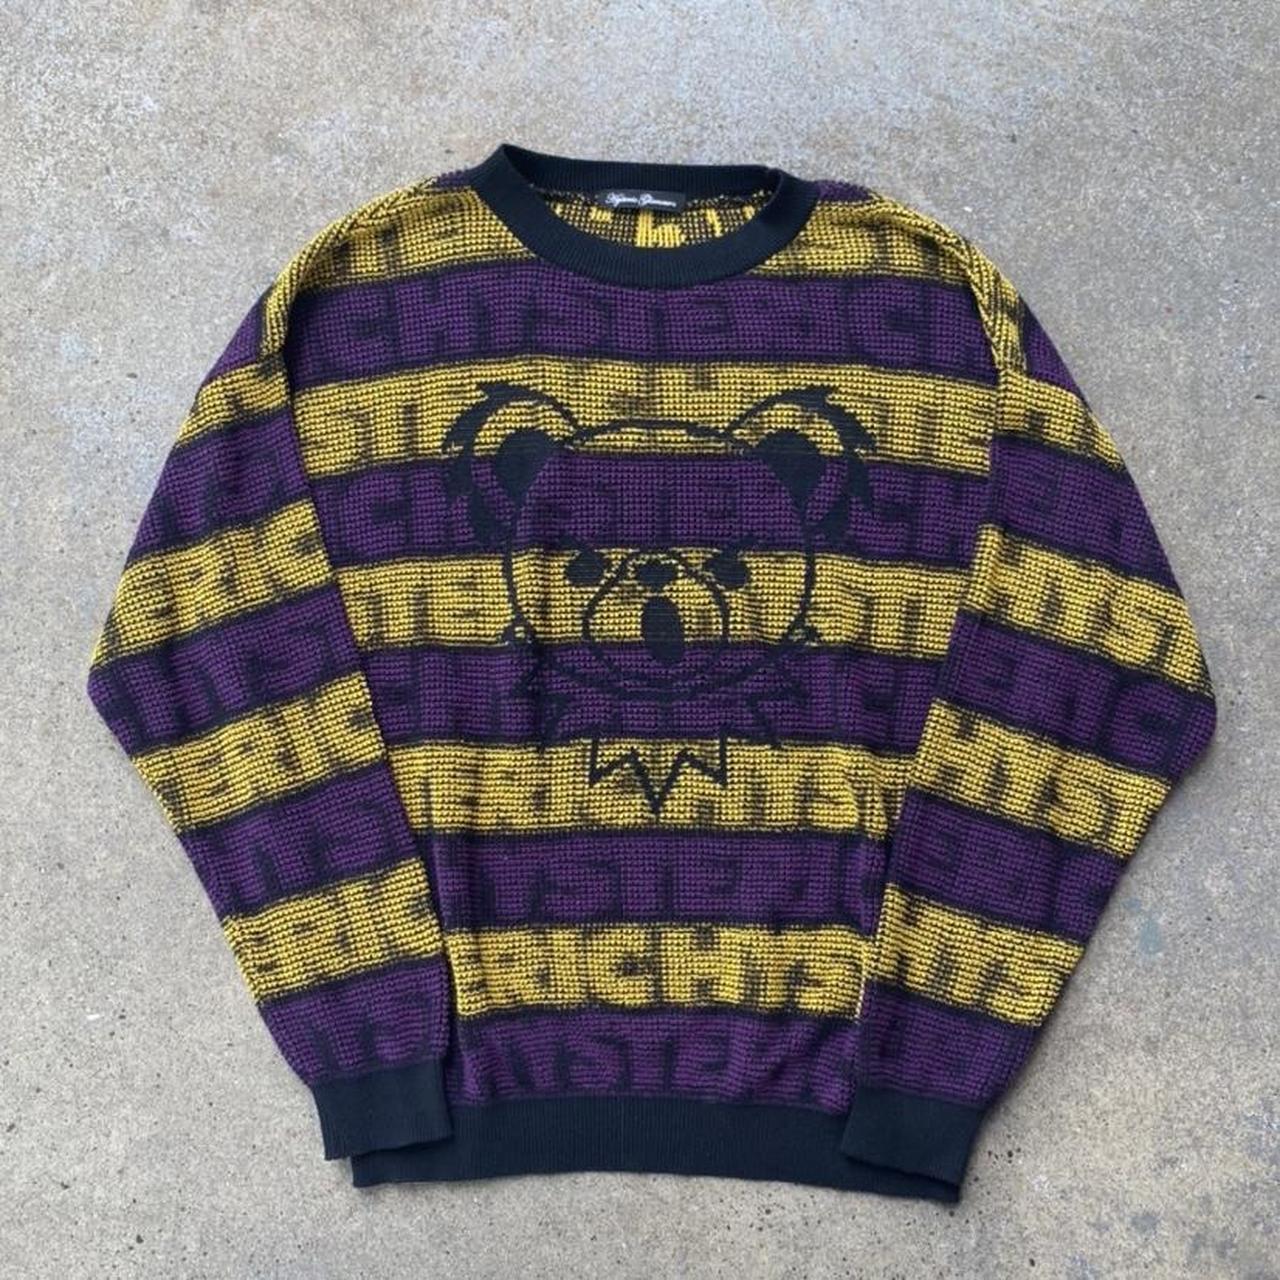 Vintage / Early 2000's Hysteric Glamour Knit Sweater... - Depop